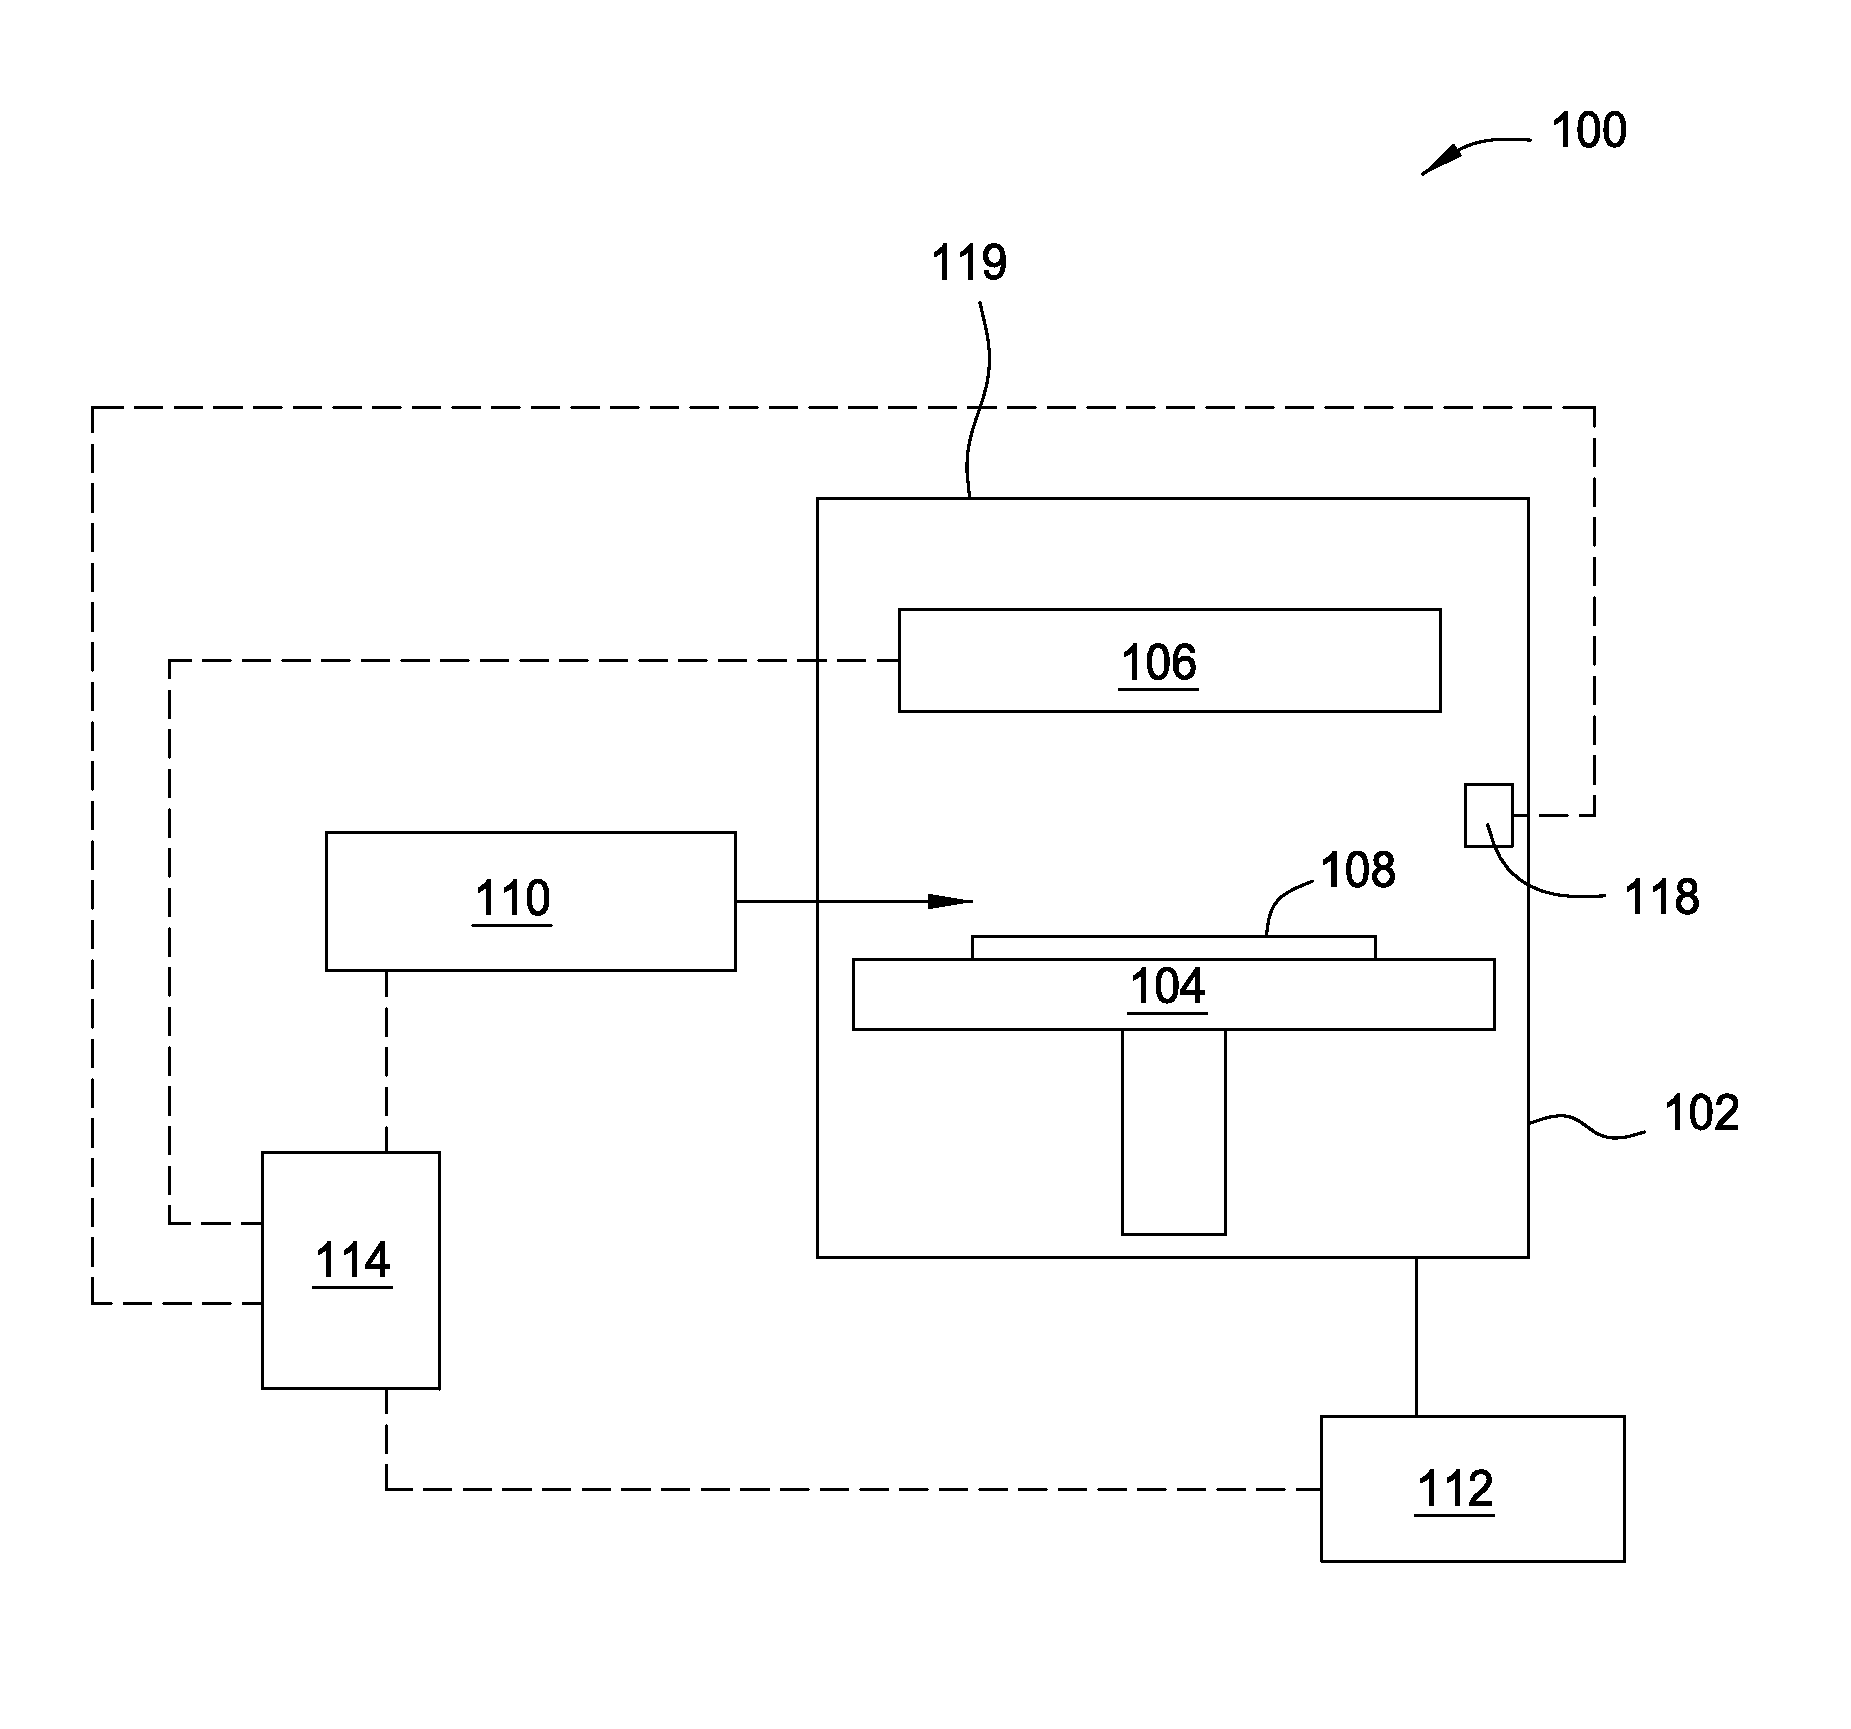 Apparatus and methods for pulsed photo-excited deposition and etch